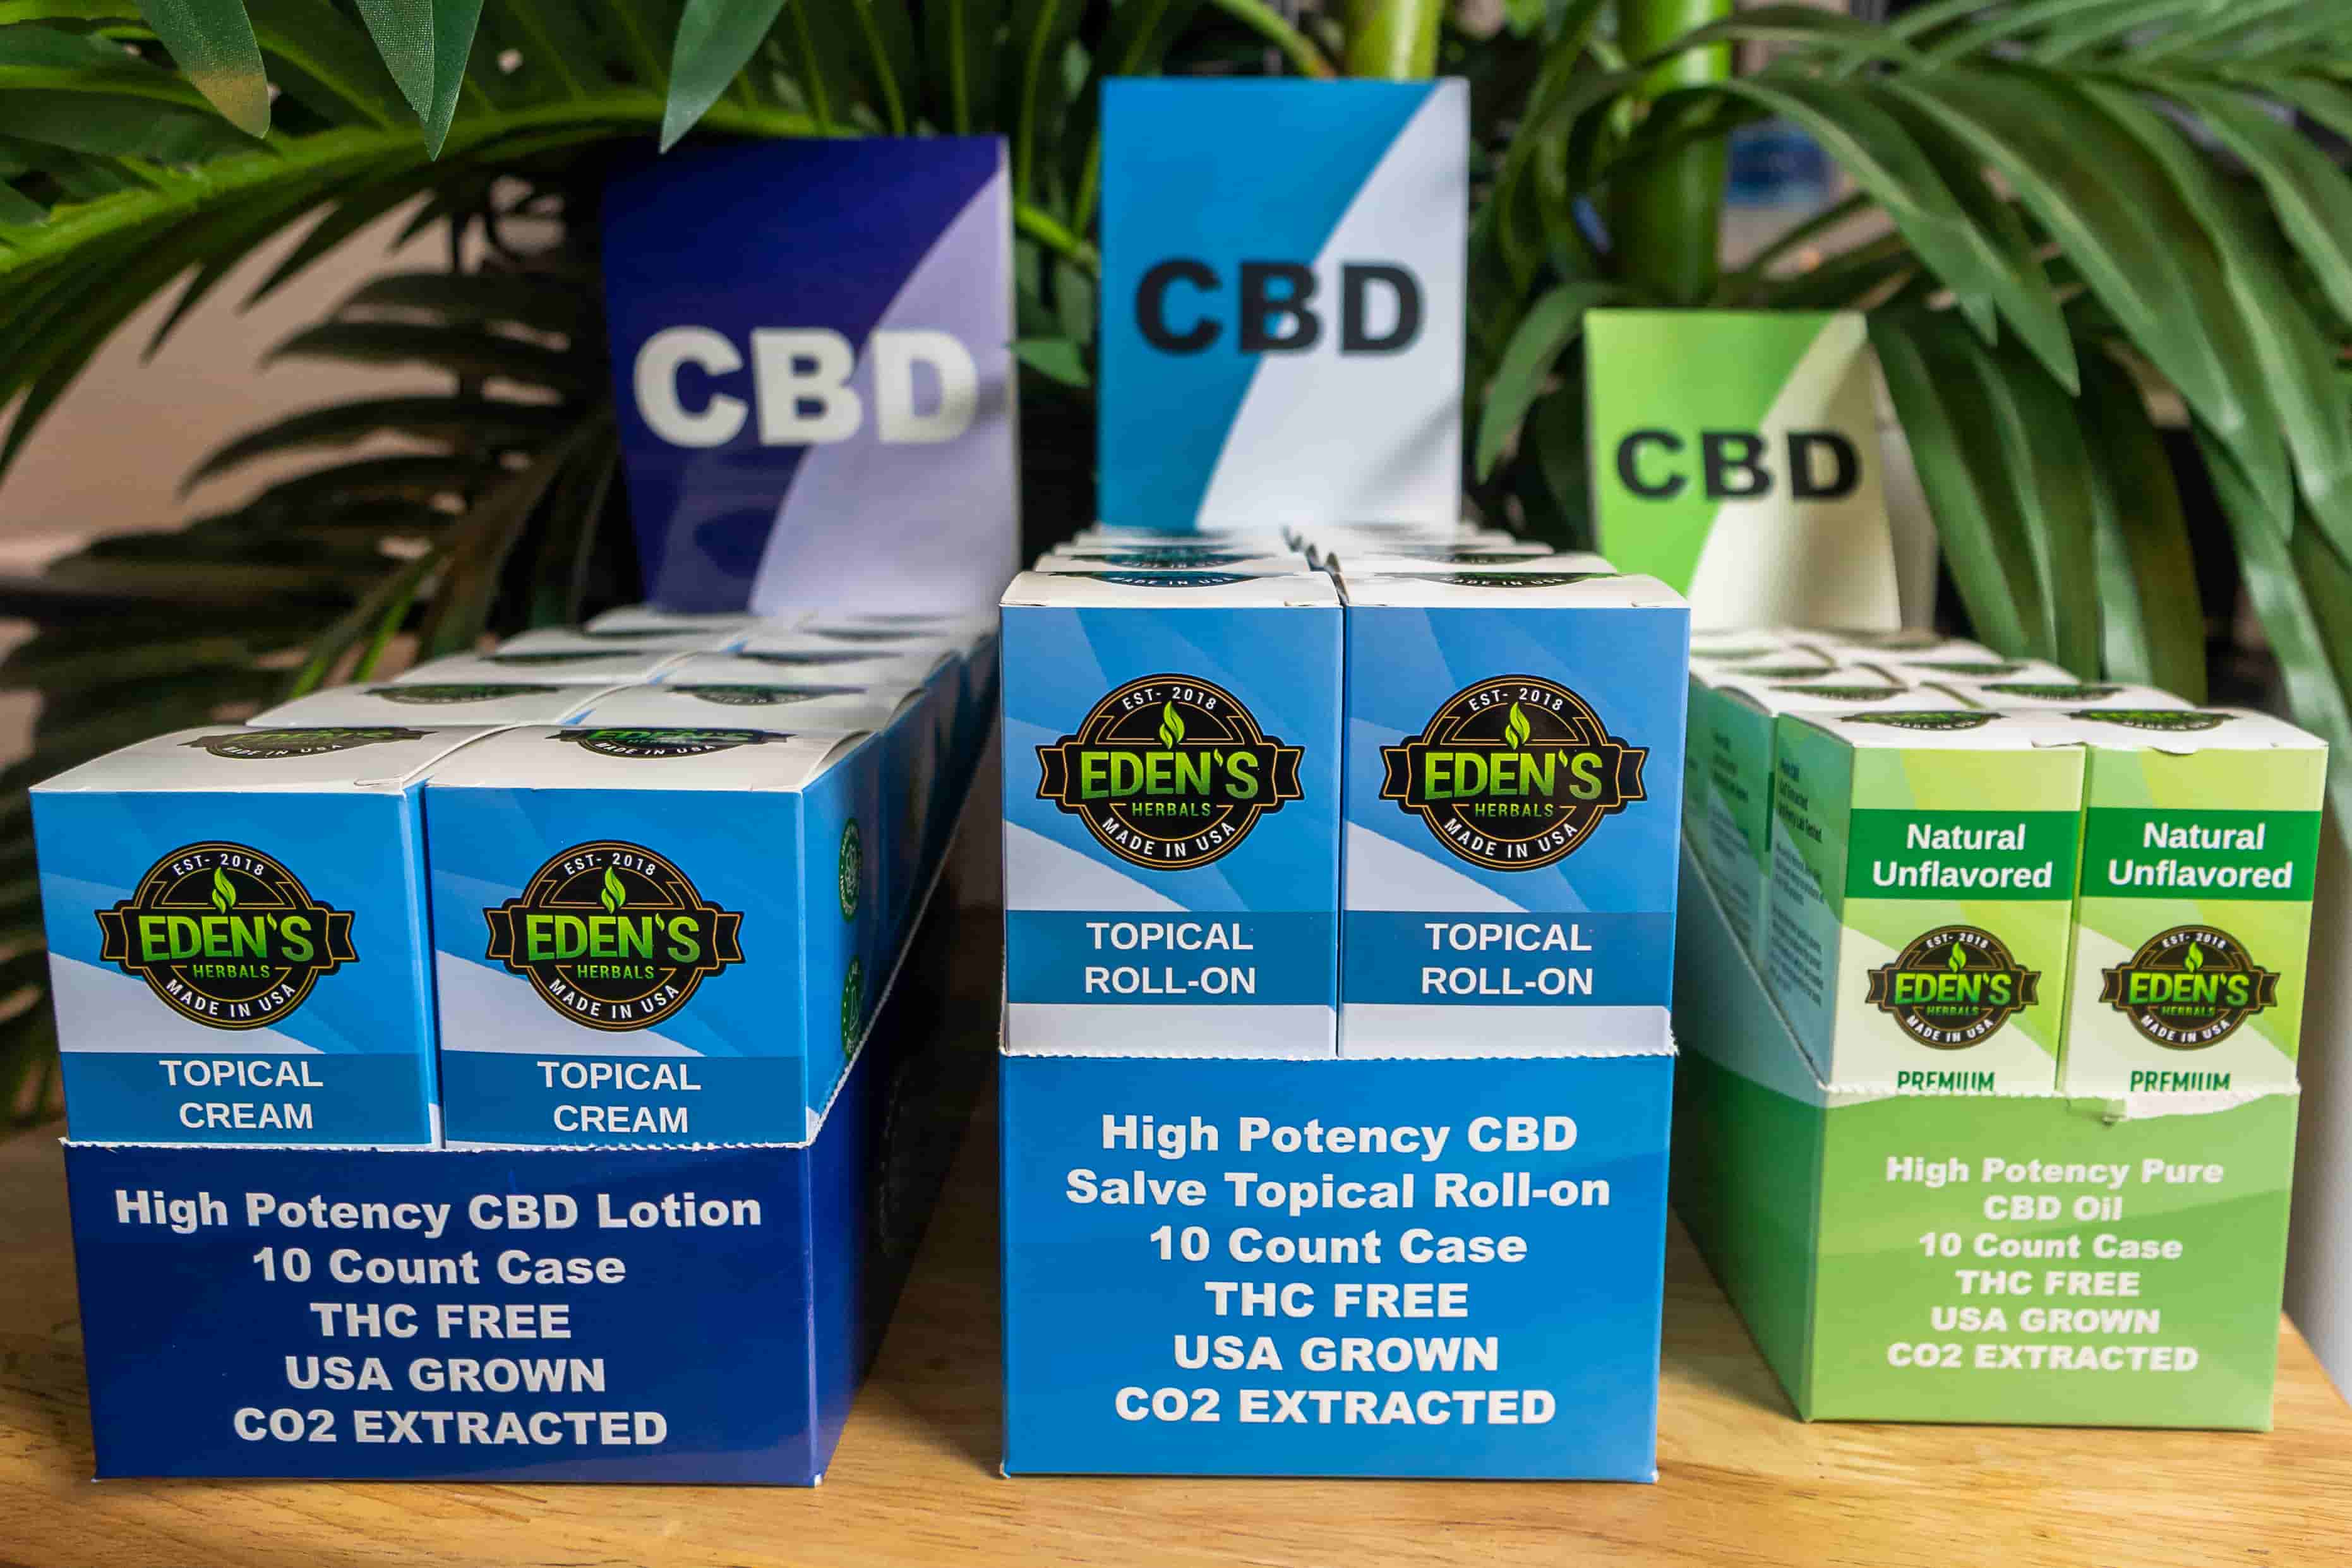 CBD Products on display ranging from CBD Oil tinctures to CBD Topicals